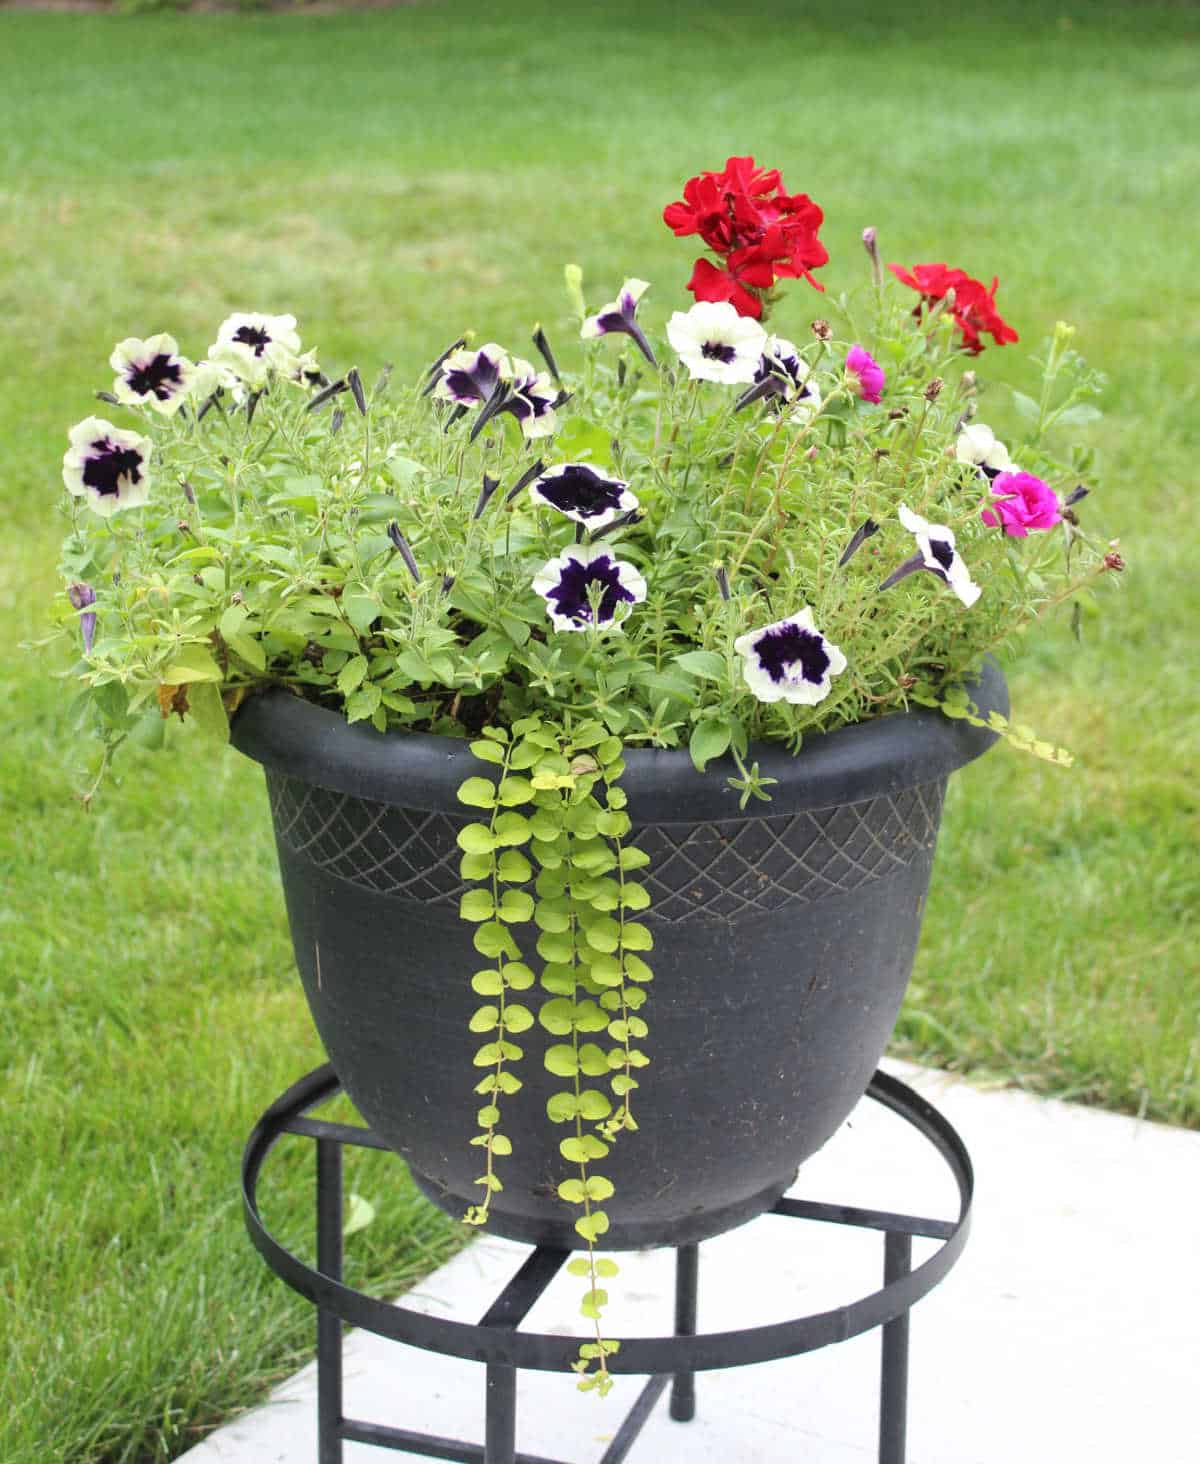 planter with red geraniums, purple petunias and creaping jenny